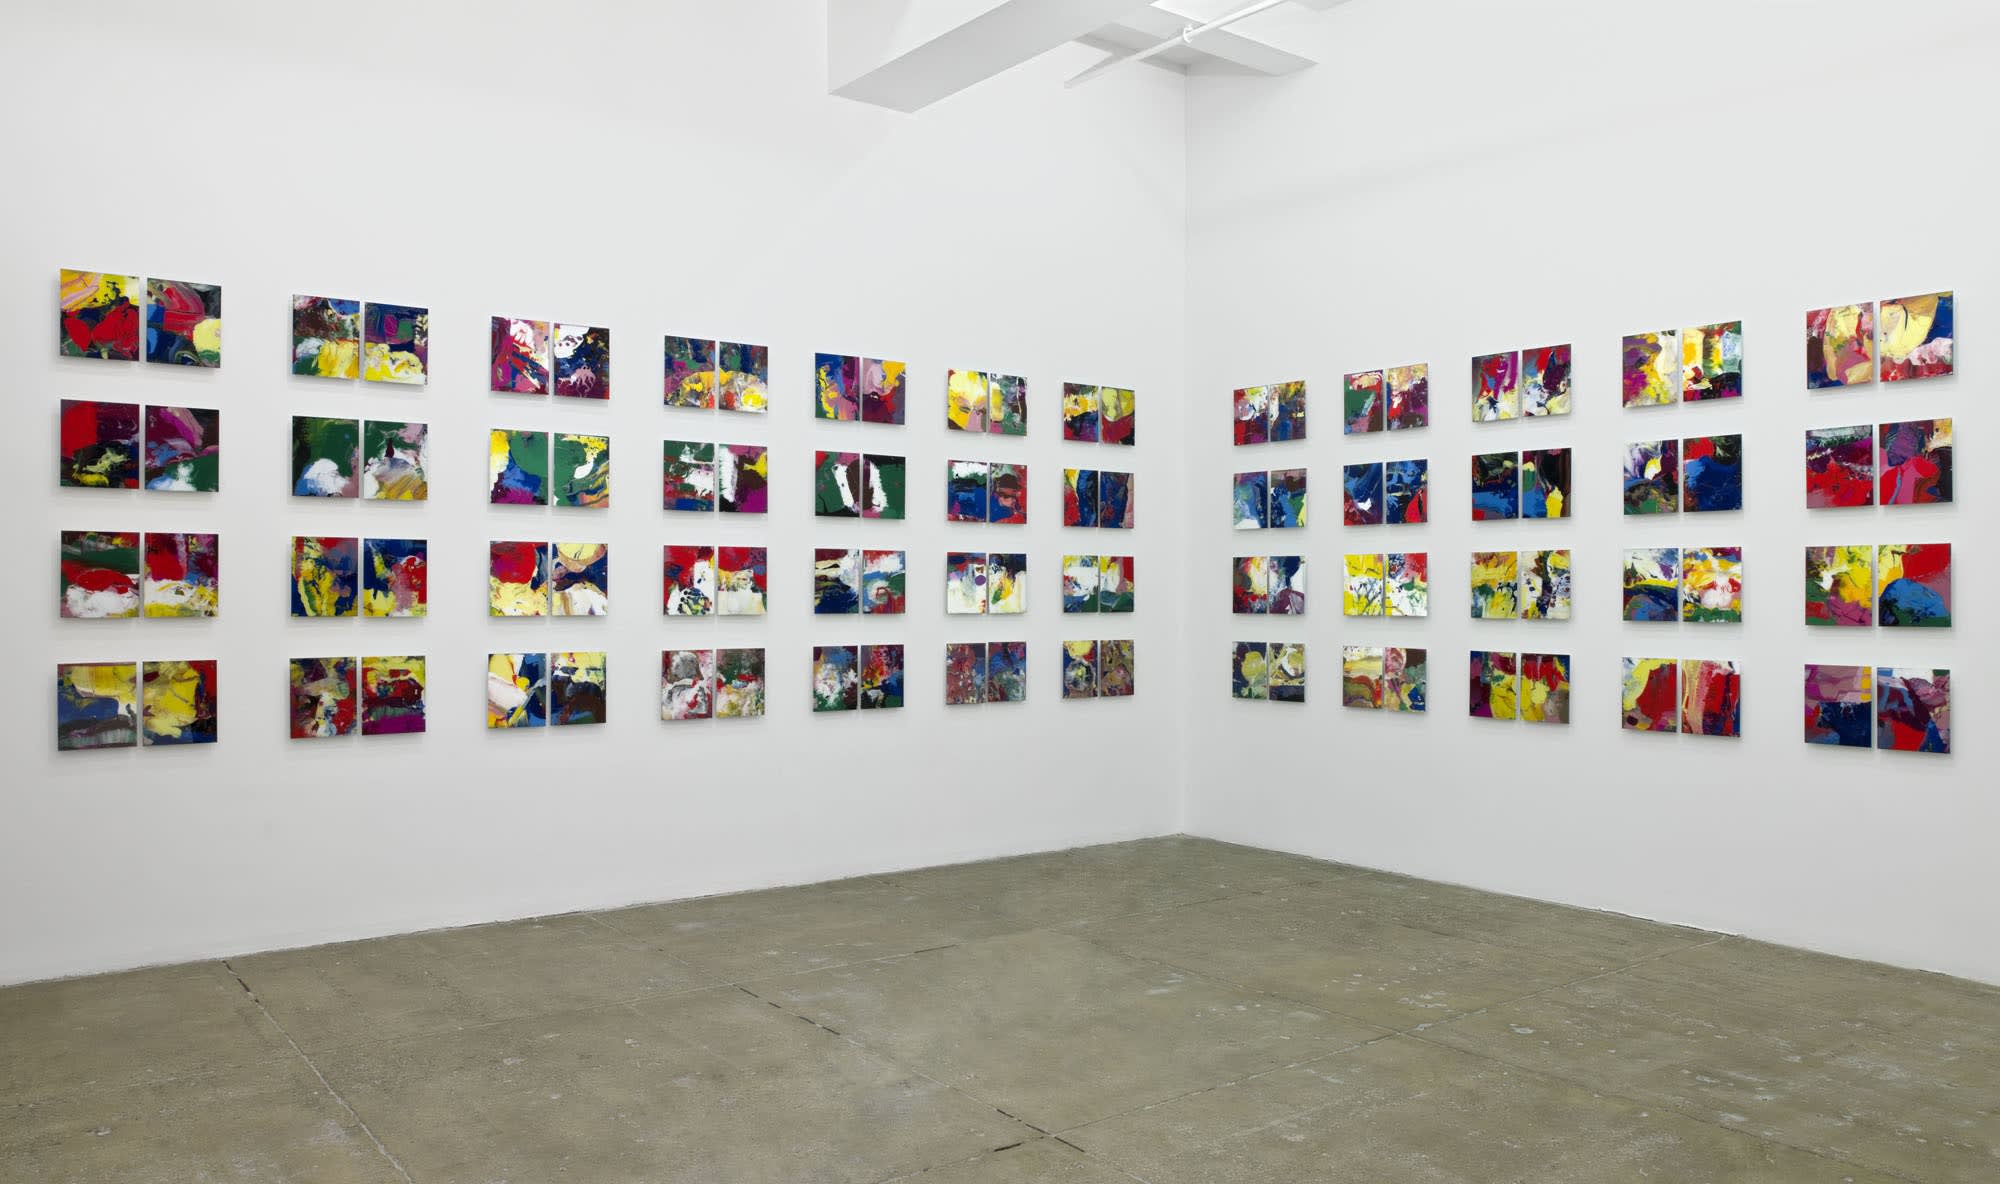 96 small, colorful paintings hang in rows of 4 and columns of 2 in a corner of a white room. 